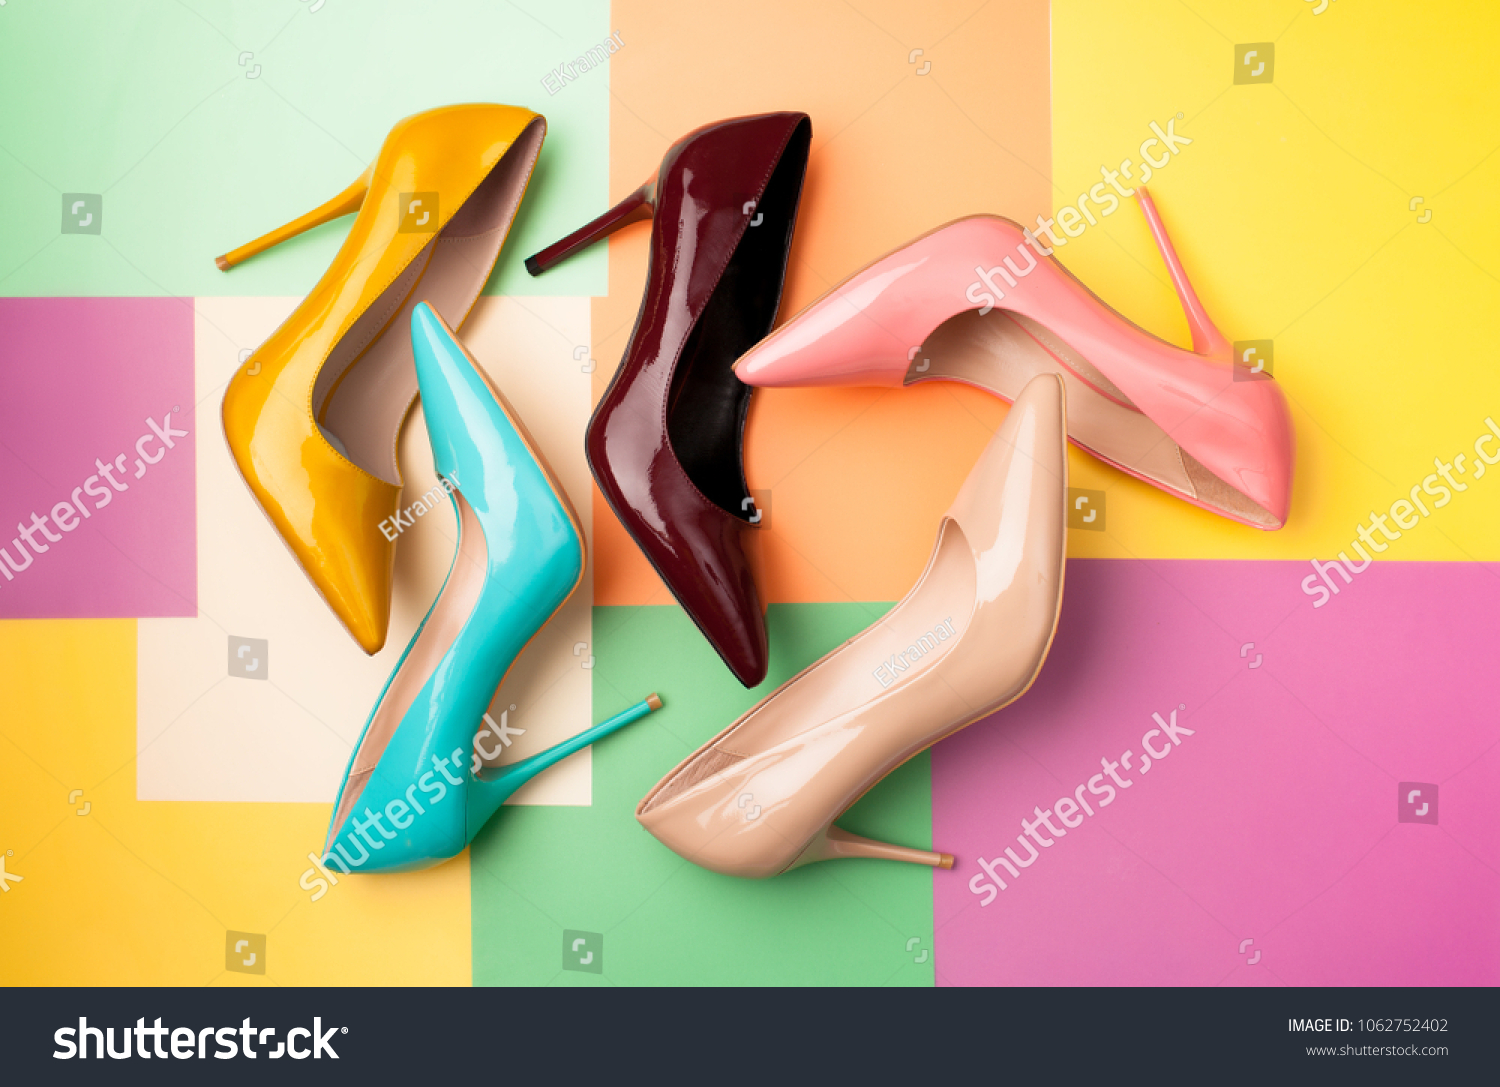 Bright colored women's shoes on a solid background. Copy space text. #1062752402